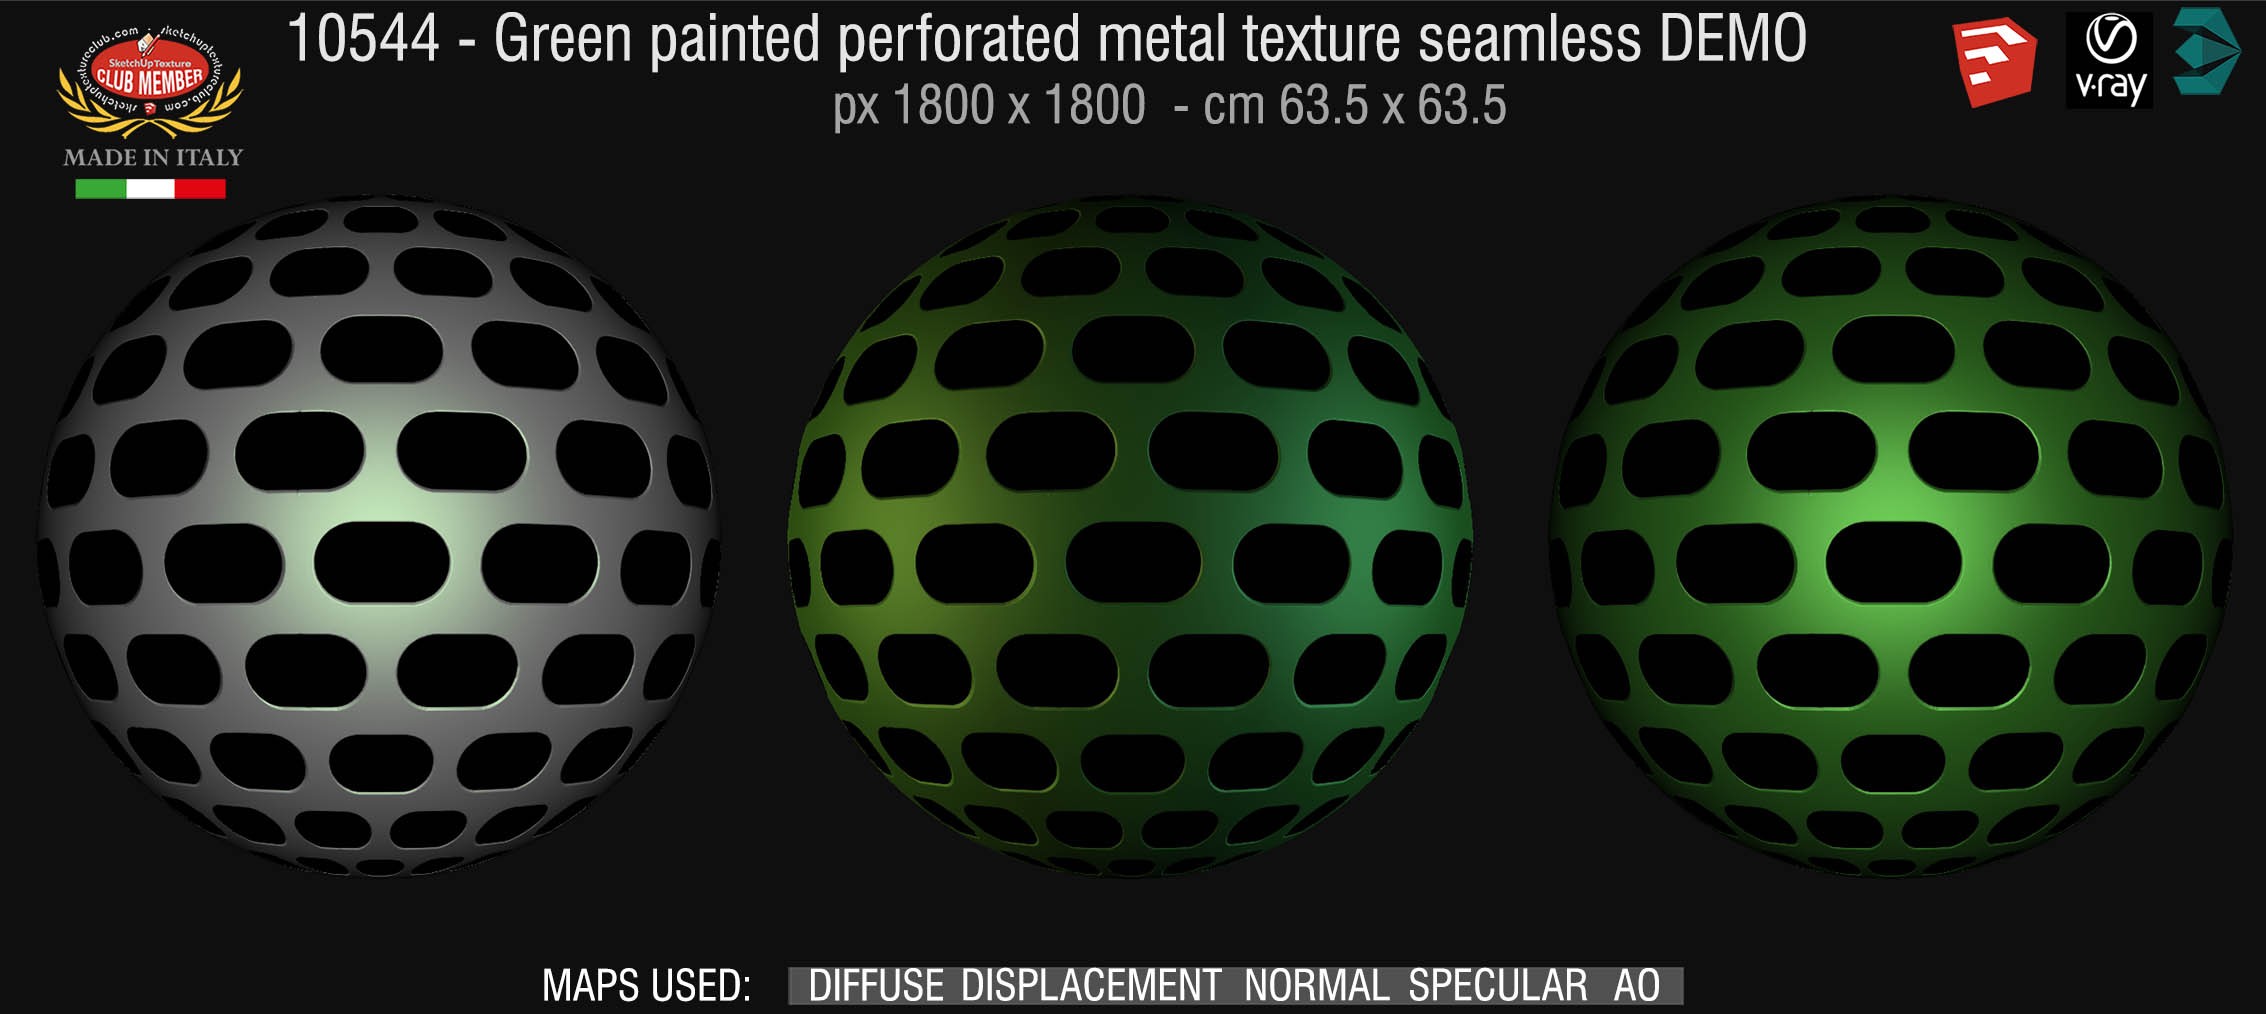 10544 HR Green painted perforate metal texture seamless + maps DEMO